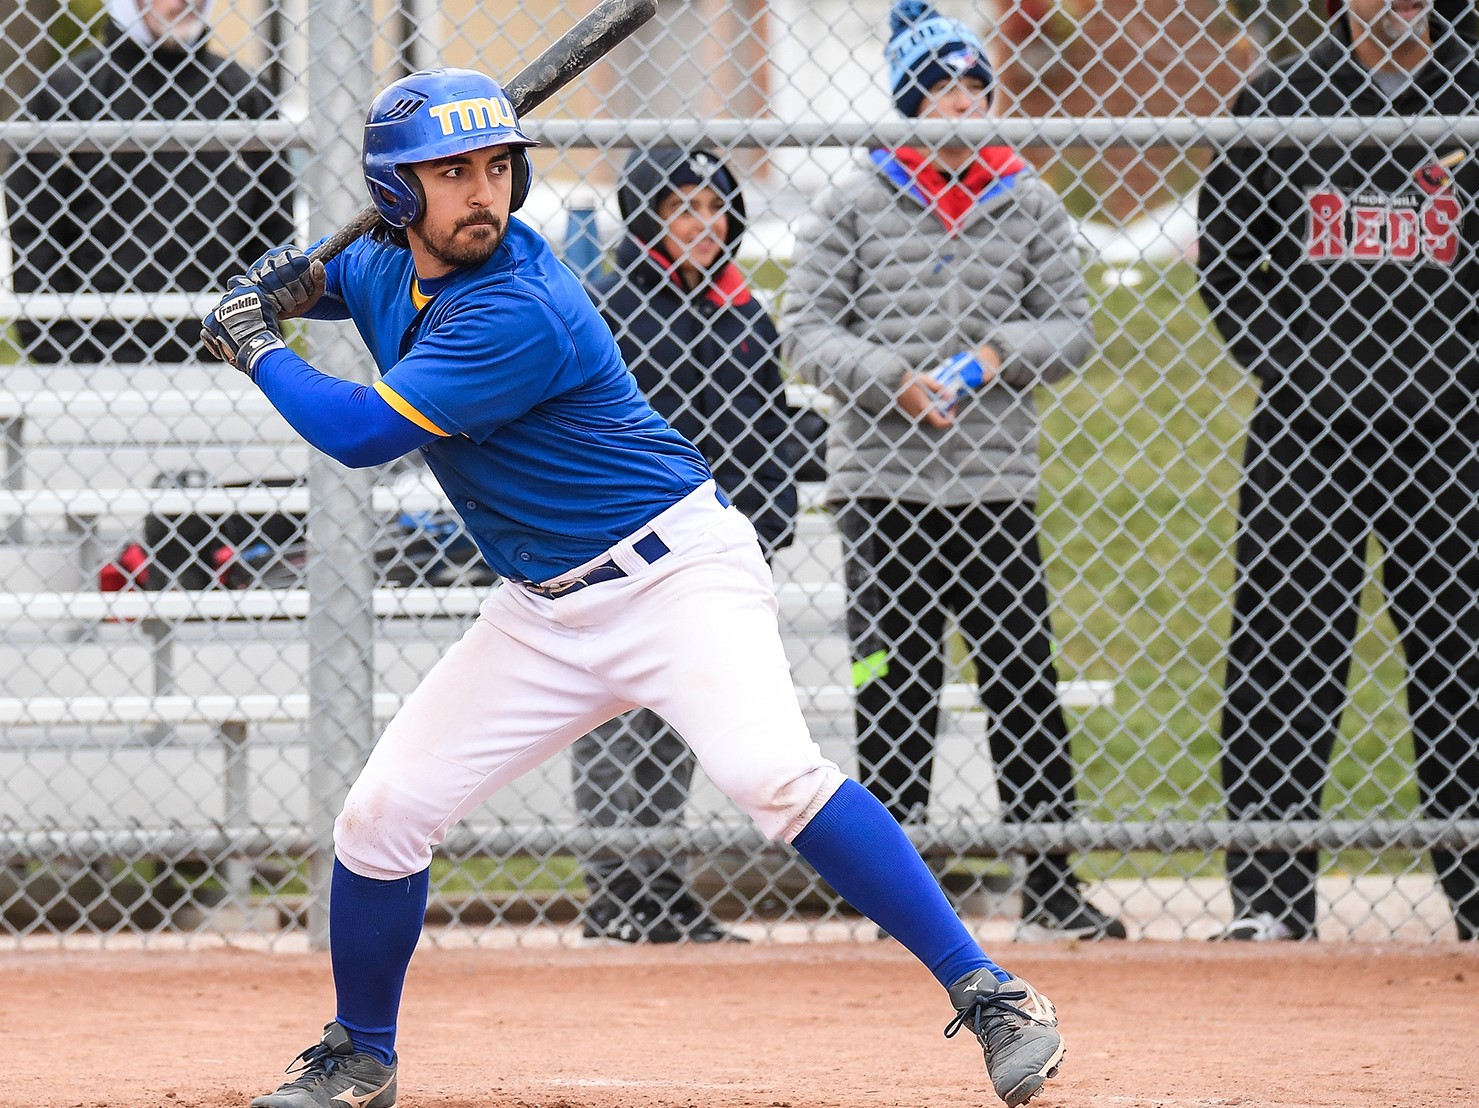 Ryerson Rams baseball player about to throw the ball.